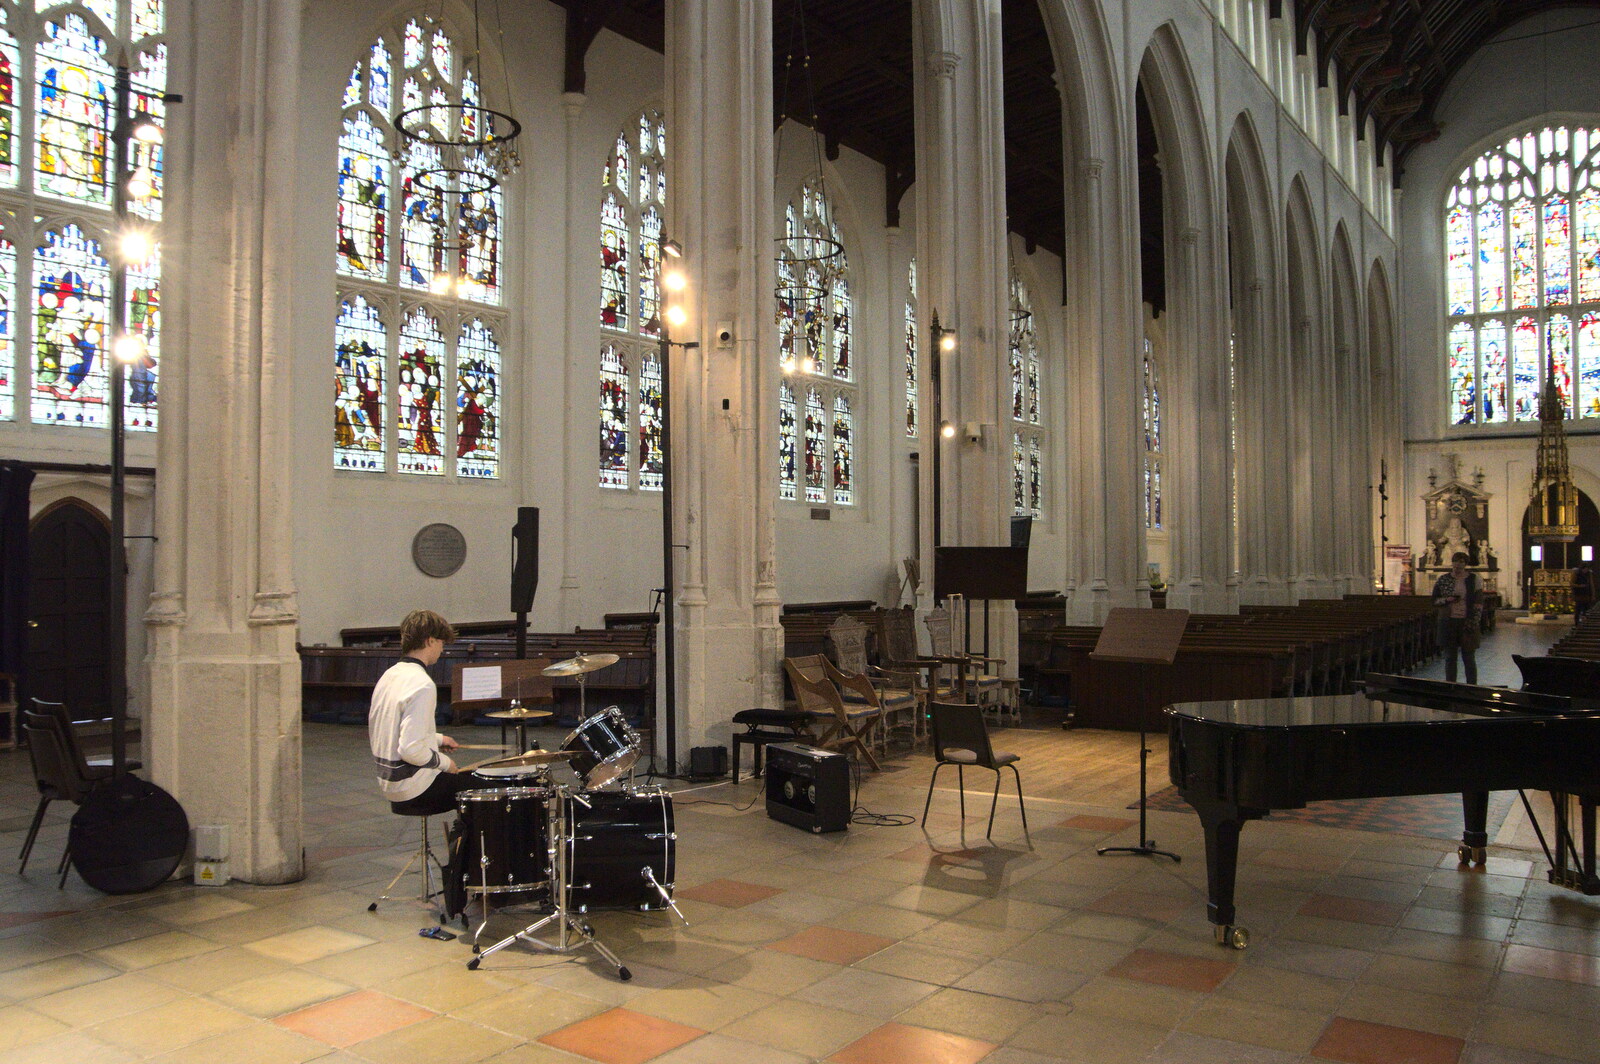 A lad plays drums in the cathedral from St. Edmundsbury Cathedral, Bury St. Edmunds, Suffolk - 14th October 2022